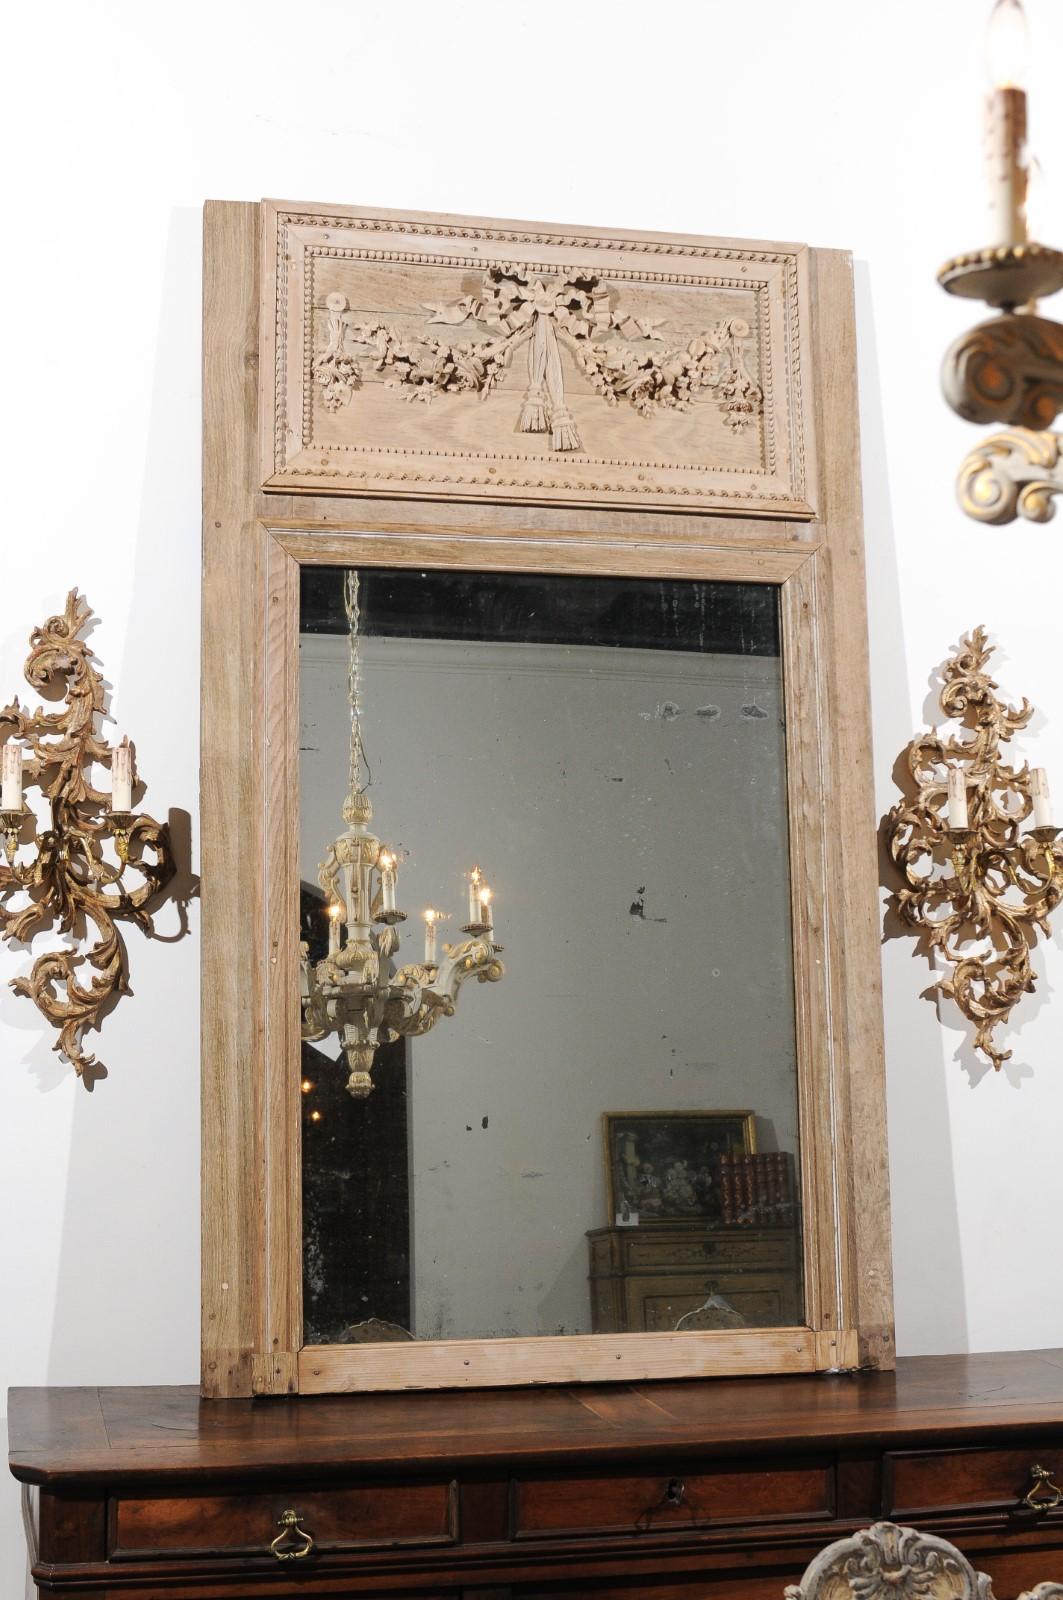 A French Louis XVI period carved wooden trumeau mirror from the late 18th century, with ribbon-tied garland of flowers and twisted motifs. Born in the later years of the 18th century, this exquisite wooden trumeau mirror features in its upper